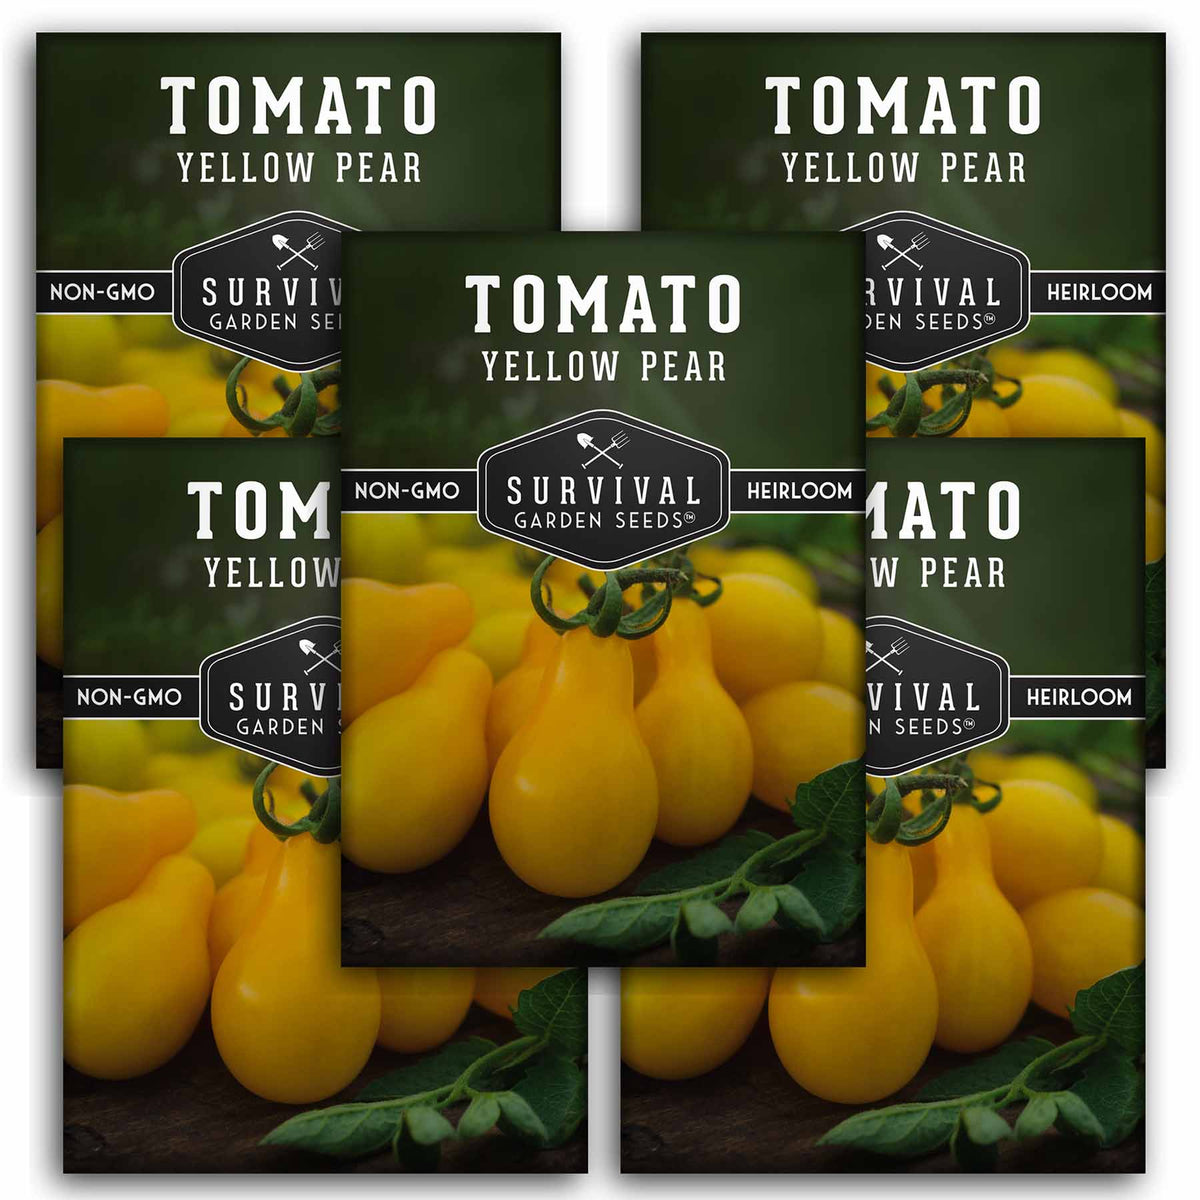 5 packets of Yellow Pear Tomato seeds